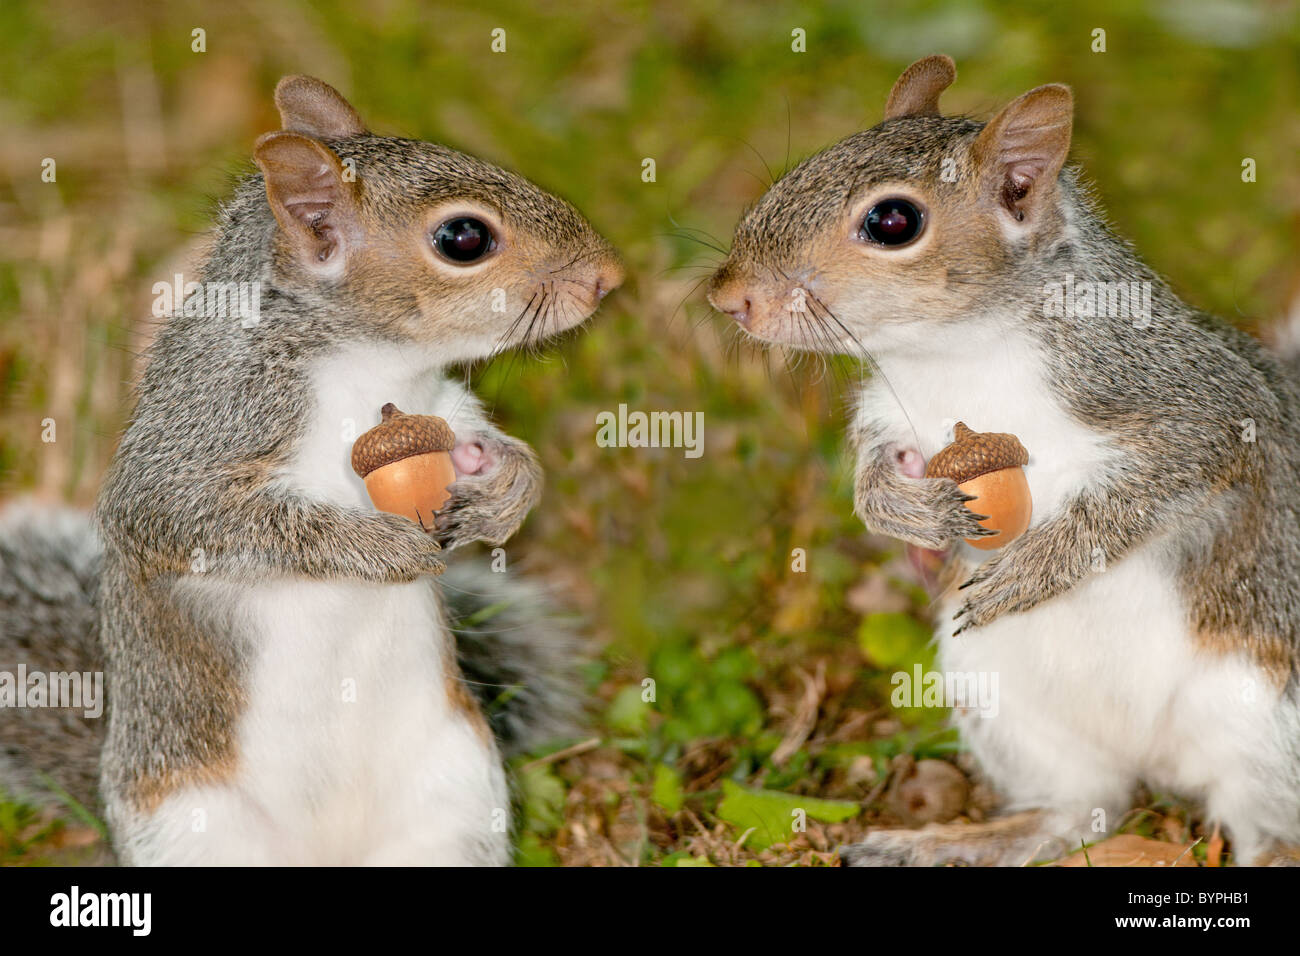 'Squirreling Away' - squirrels preparing for winter? Stock Photo